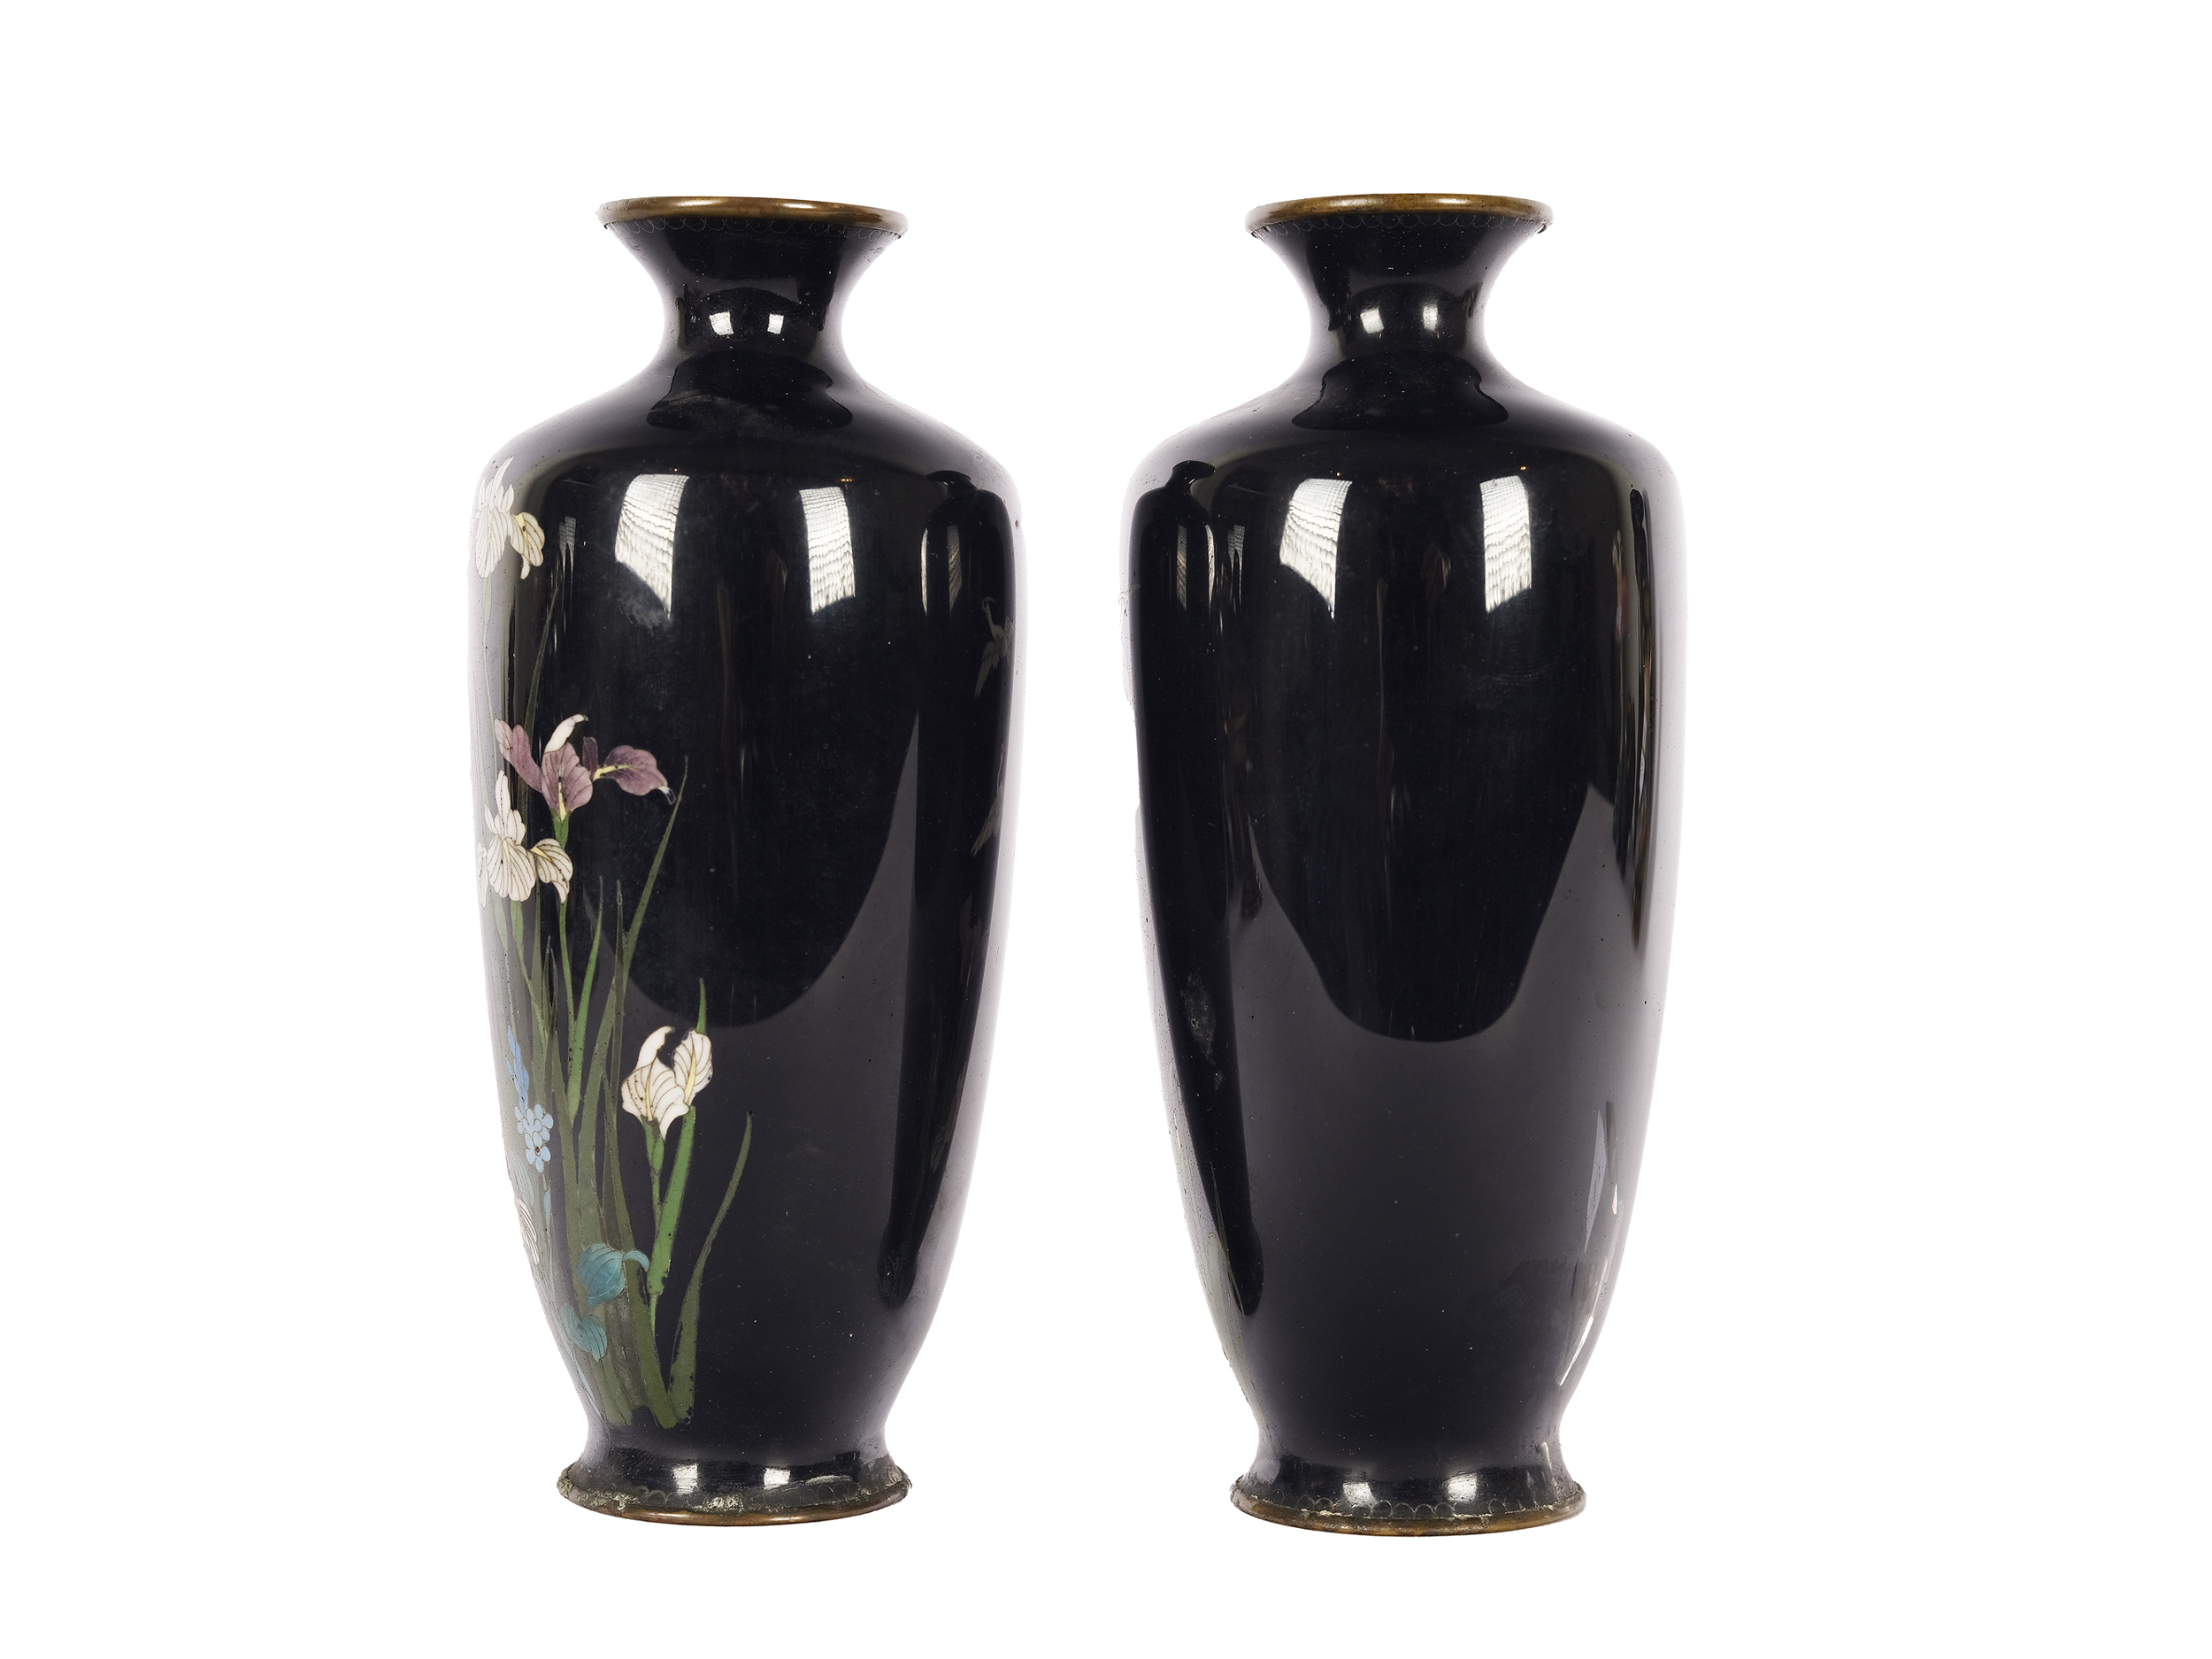 Pair of cloisonné vases - Image 2 of 3